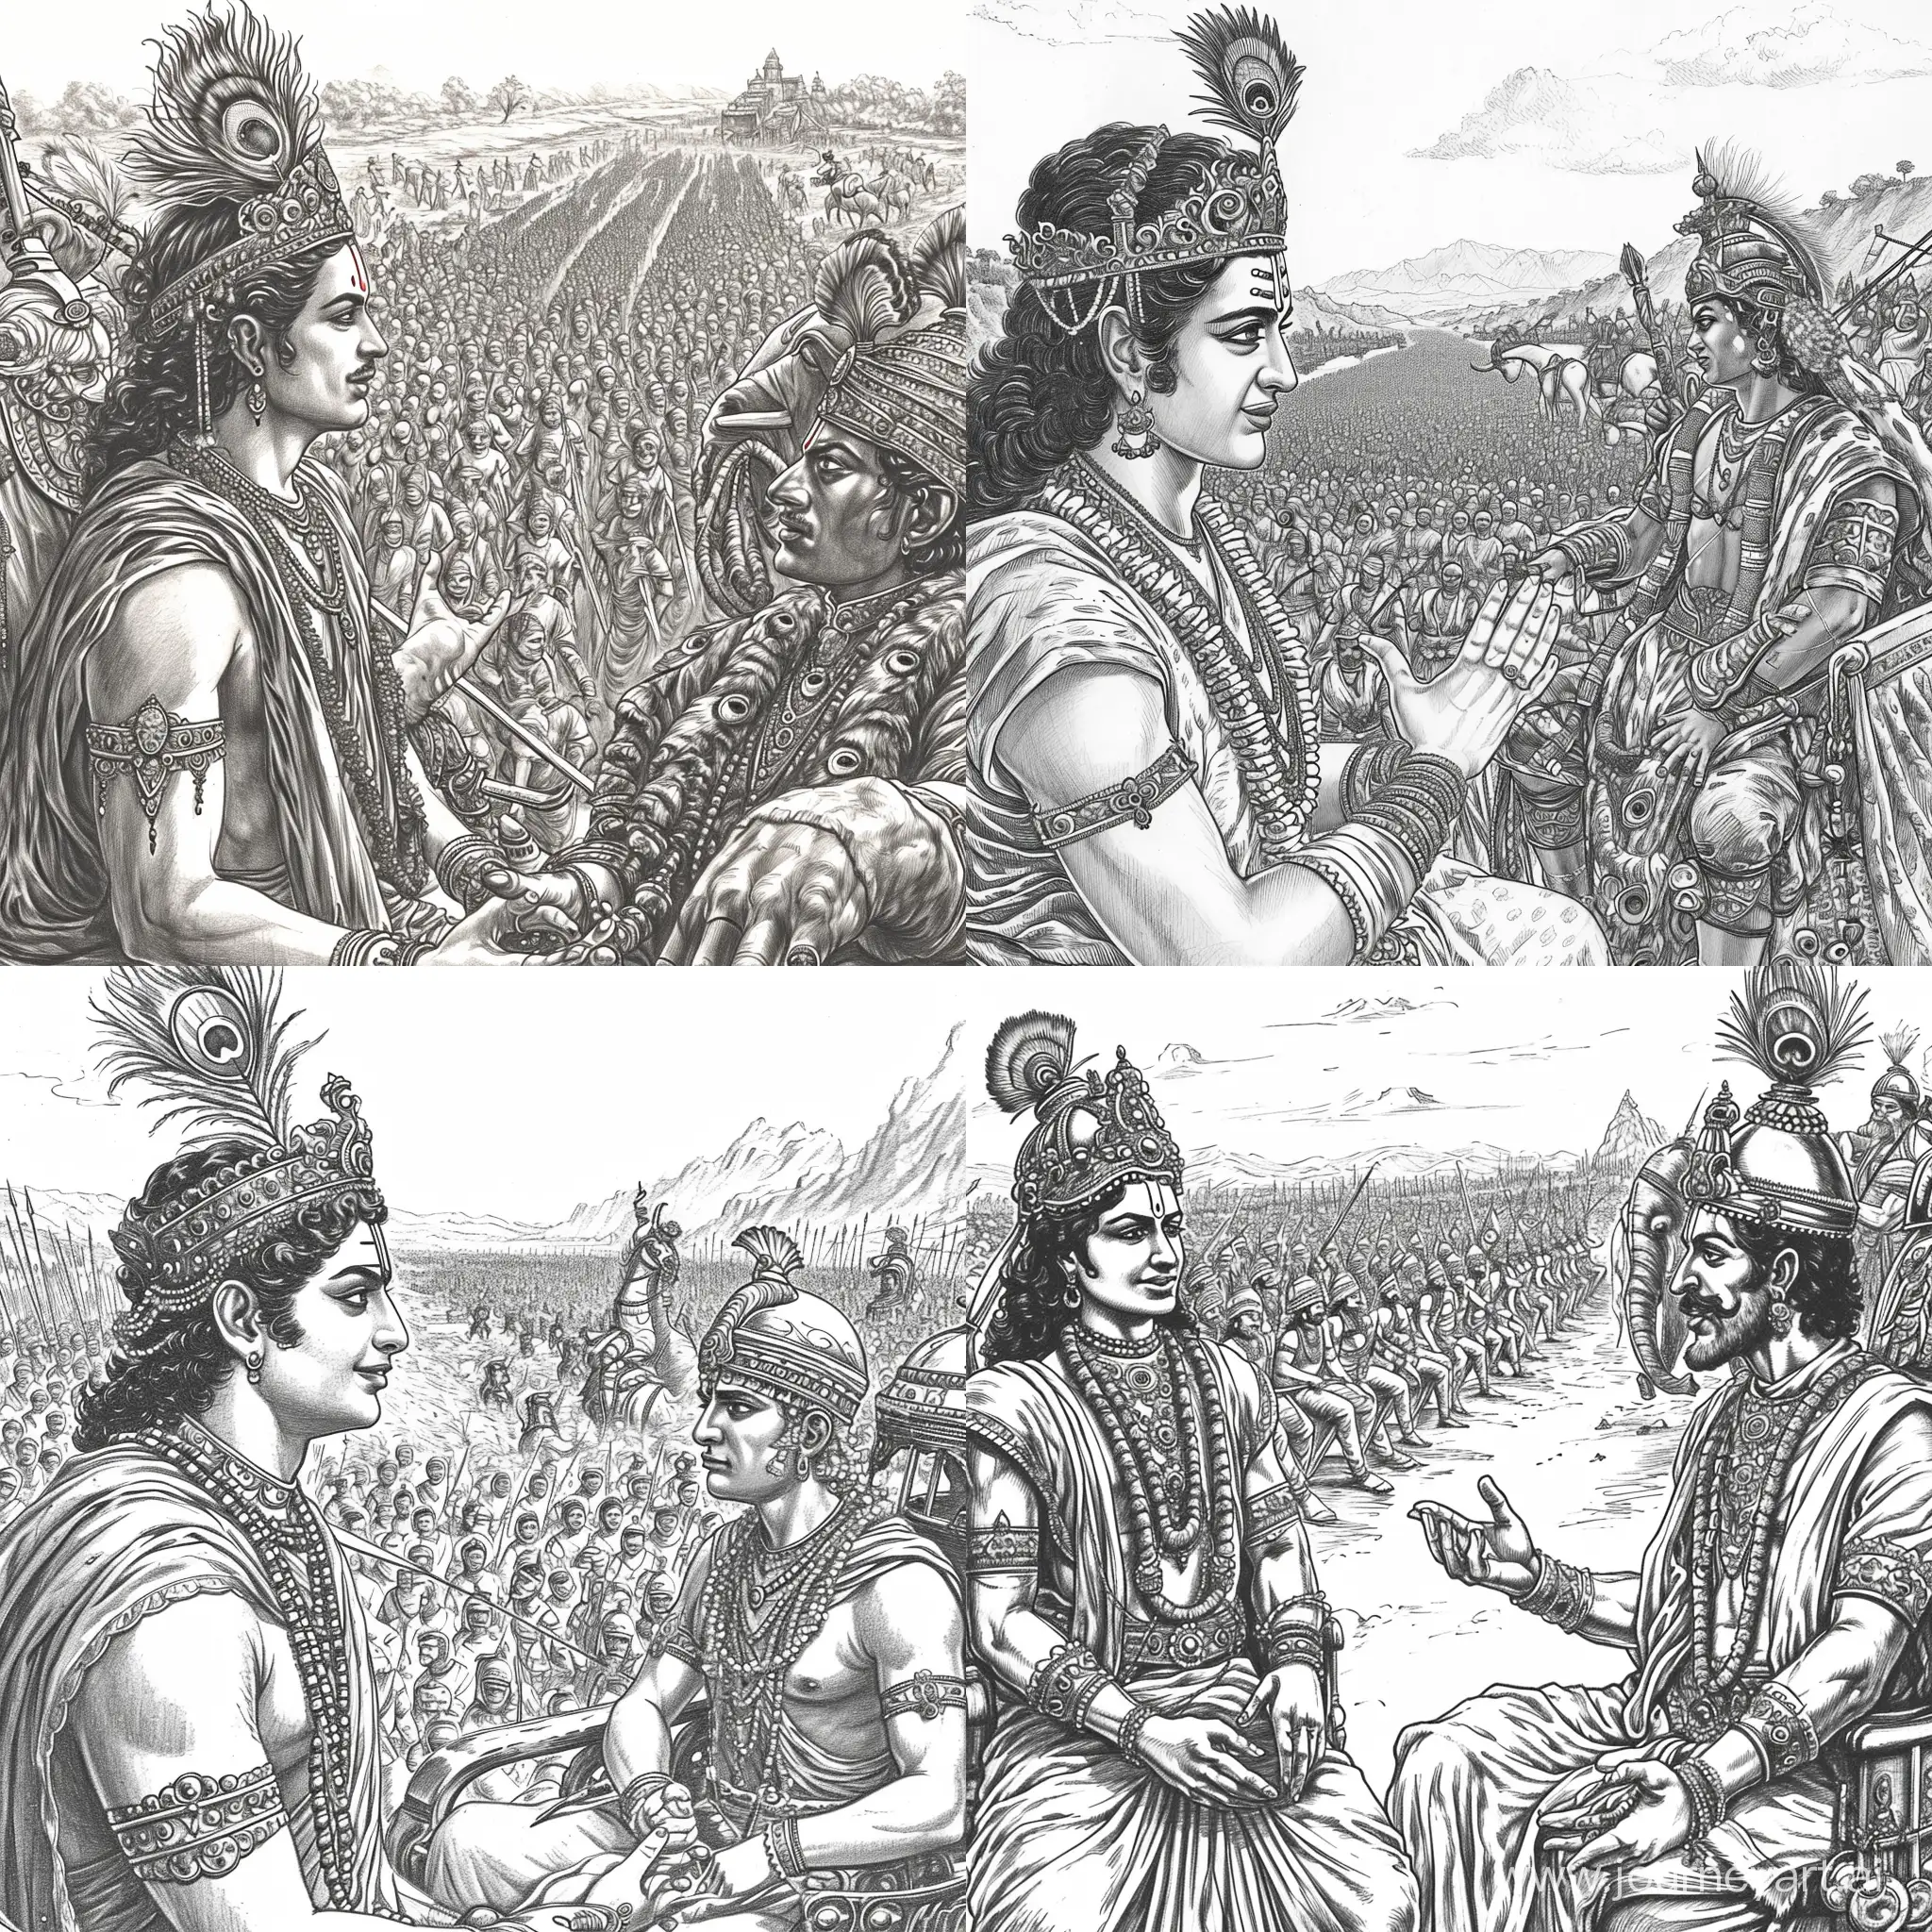 Manga Style sketch Black and White Image of Krishna ( A Character from Epic Mahabharata) Talking to Arjuna (Who's sitting in Chariot ) wearing Crown and Jewelleries of gold with Peacock Feather in Head between batterfield of kurukshetra where there are millions of soldiers are there with many warrior kings in the front and a Leader King Sitting on Elephant in Royal Warrior look in the right side of the battlefield while Krishna and Arjuna are in the left side of the battlefield with their army of millions of soldier. Image must be hand drawn with lots of detail looking like a manga art